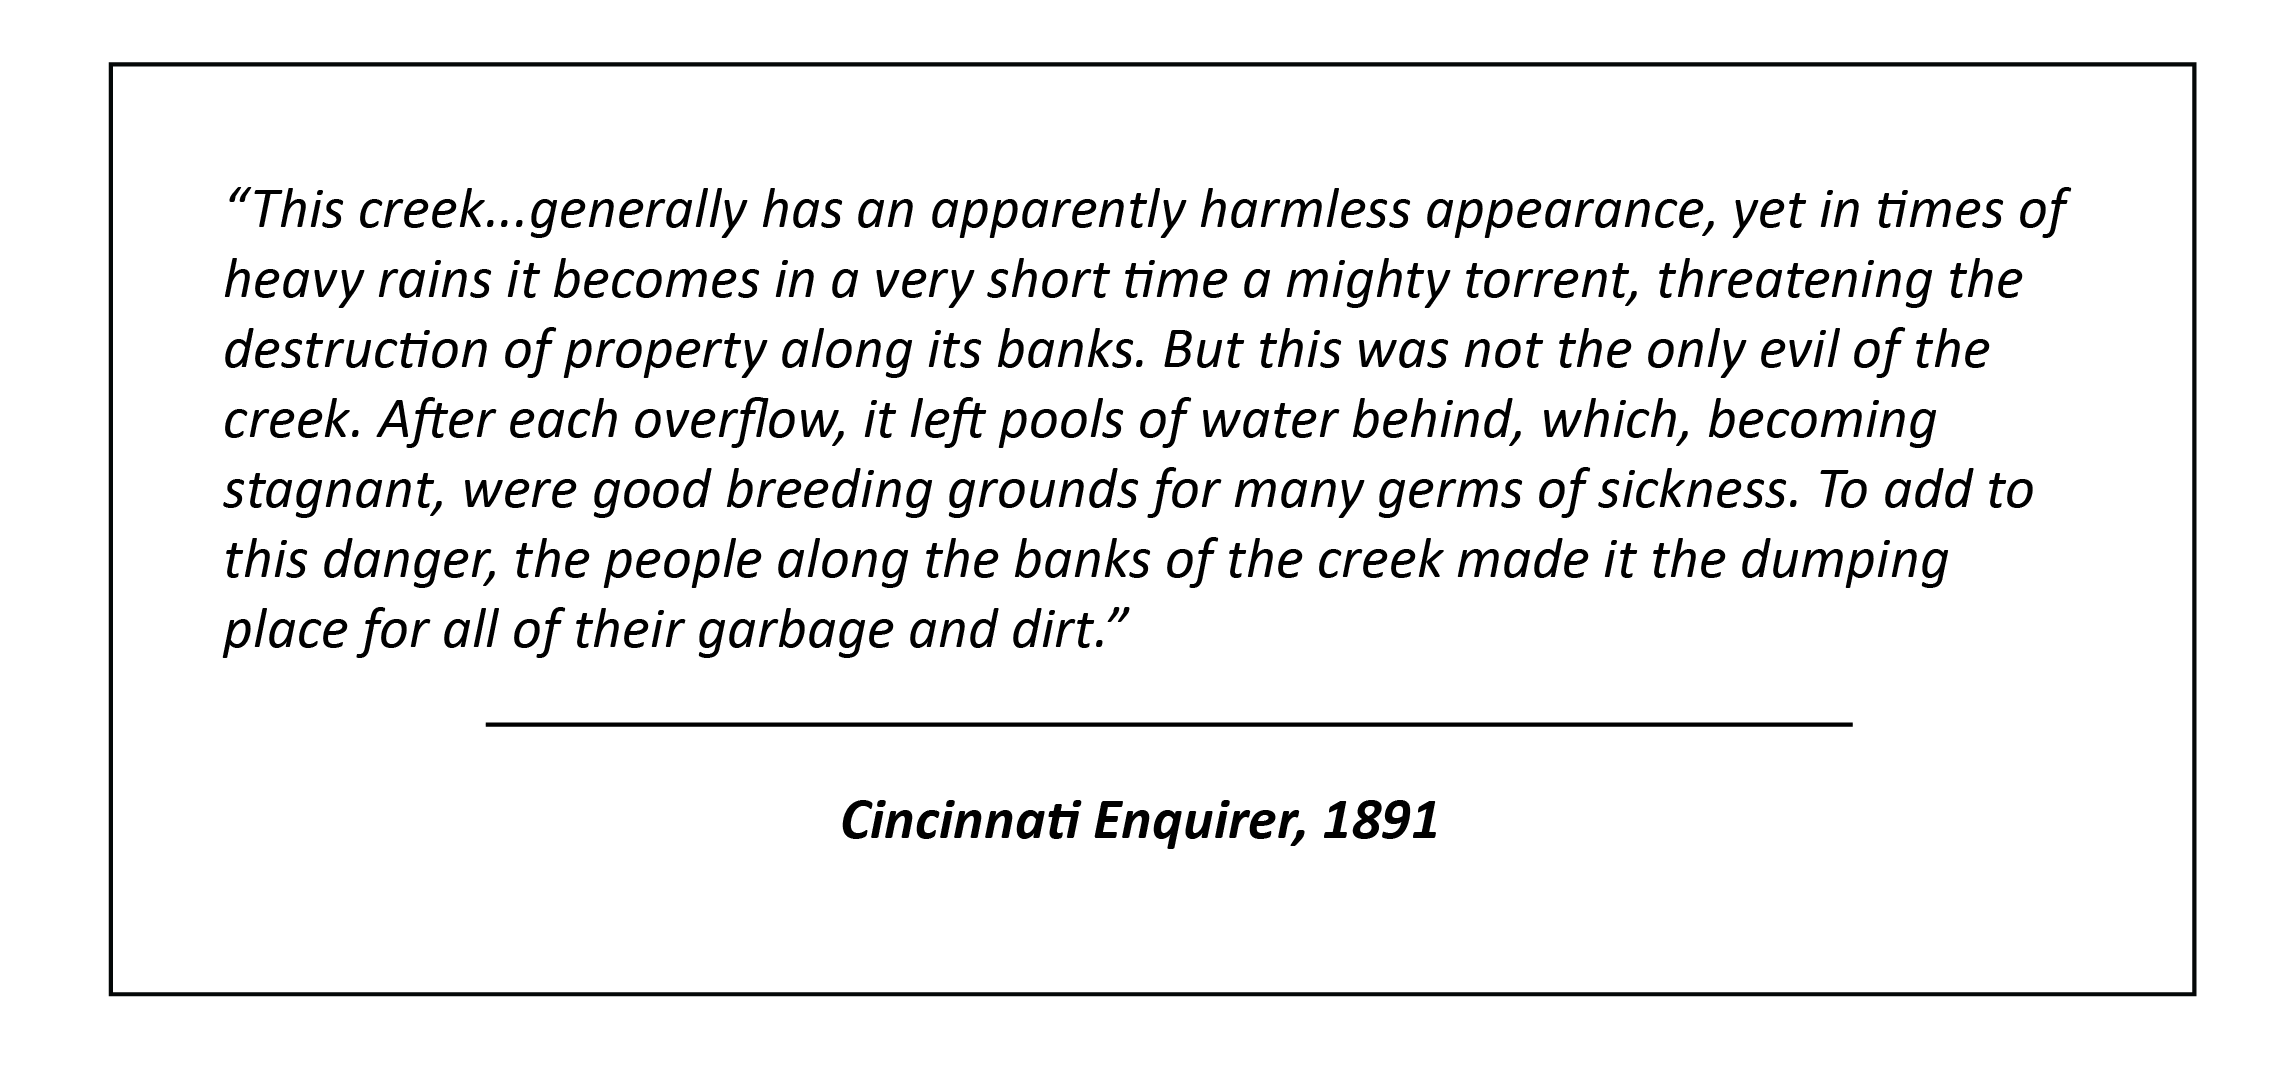 Quote from an 1891 Cincinnati Enquirer article